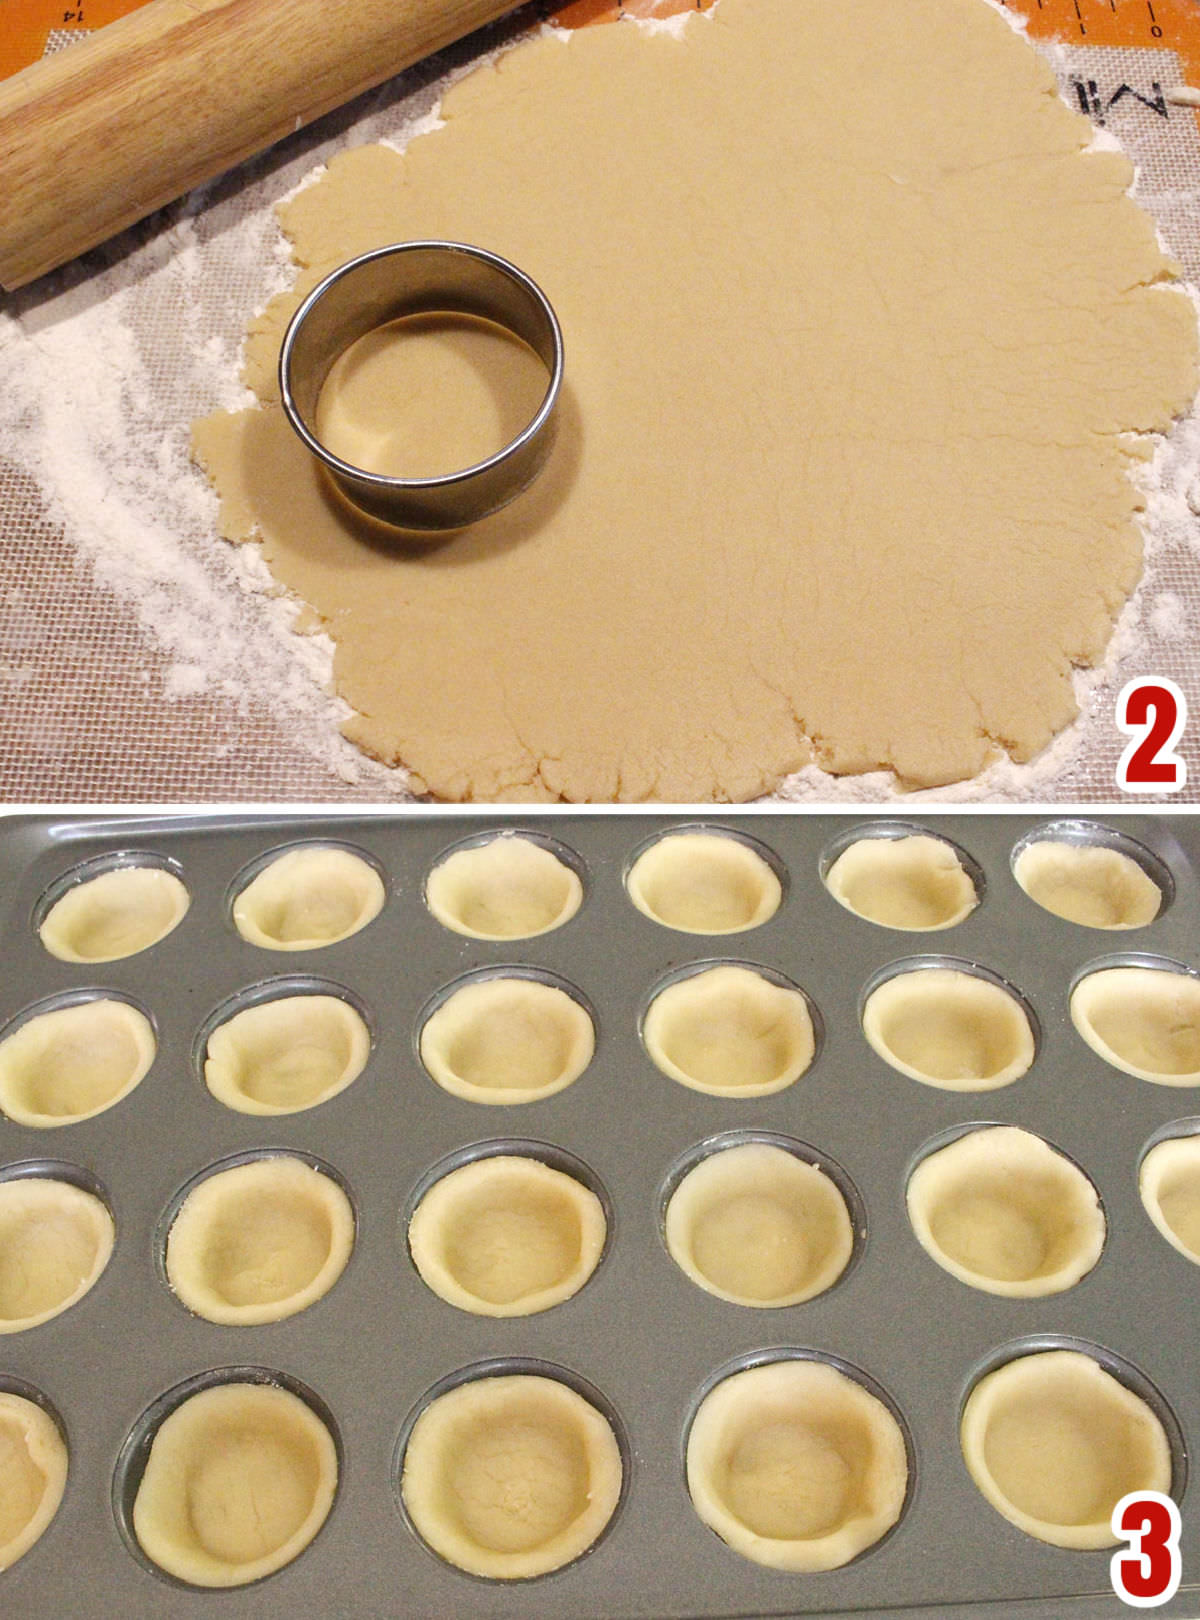 Collage image showing the steps for baking the Sugar Cookie Cups.